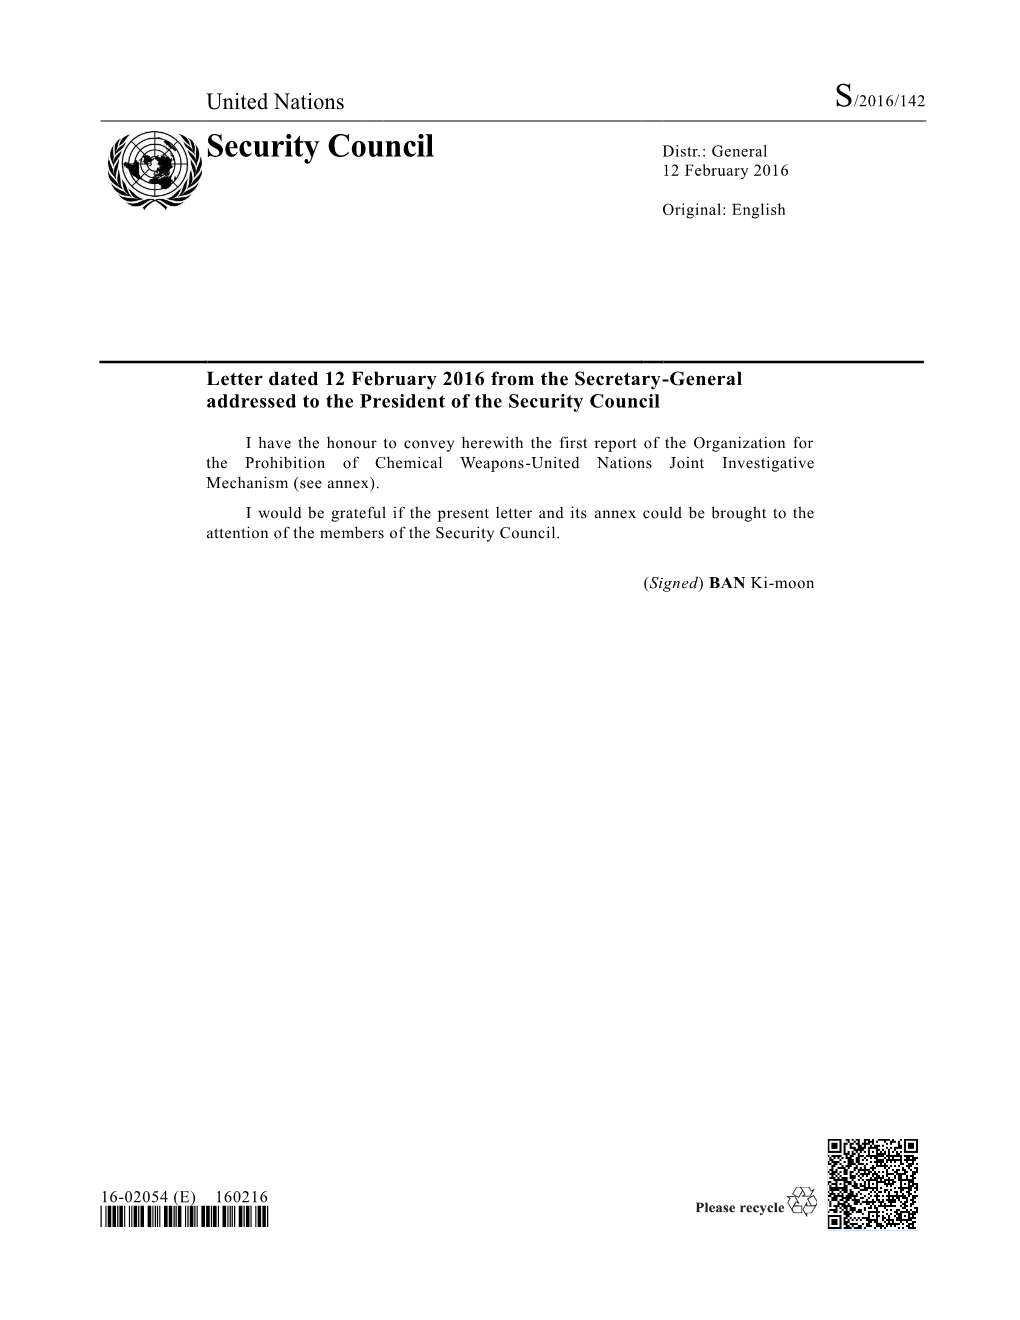 Report of the Organization for the Prohibition of Chemical Weapons-United Nations Joint Investigative Mechanism (See Annex)